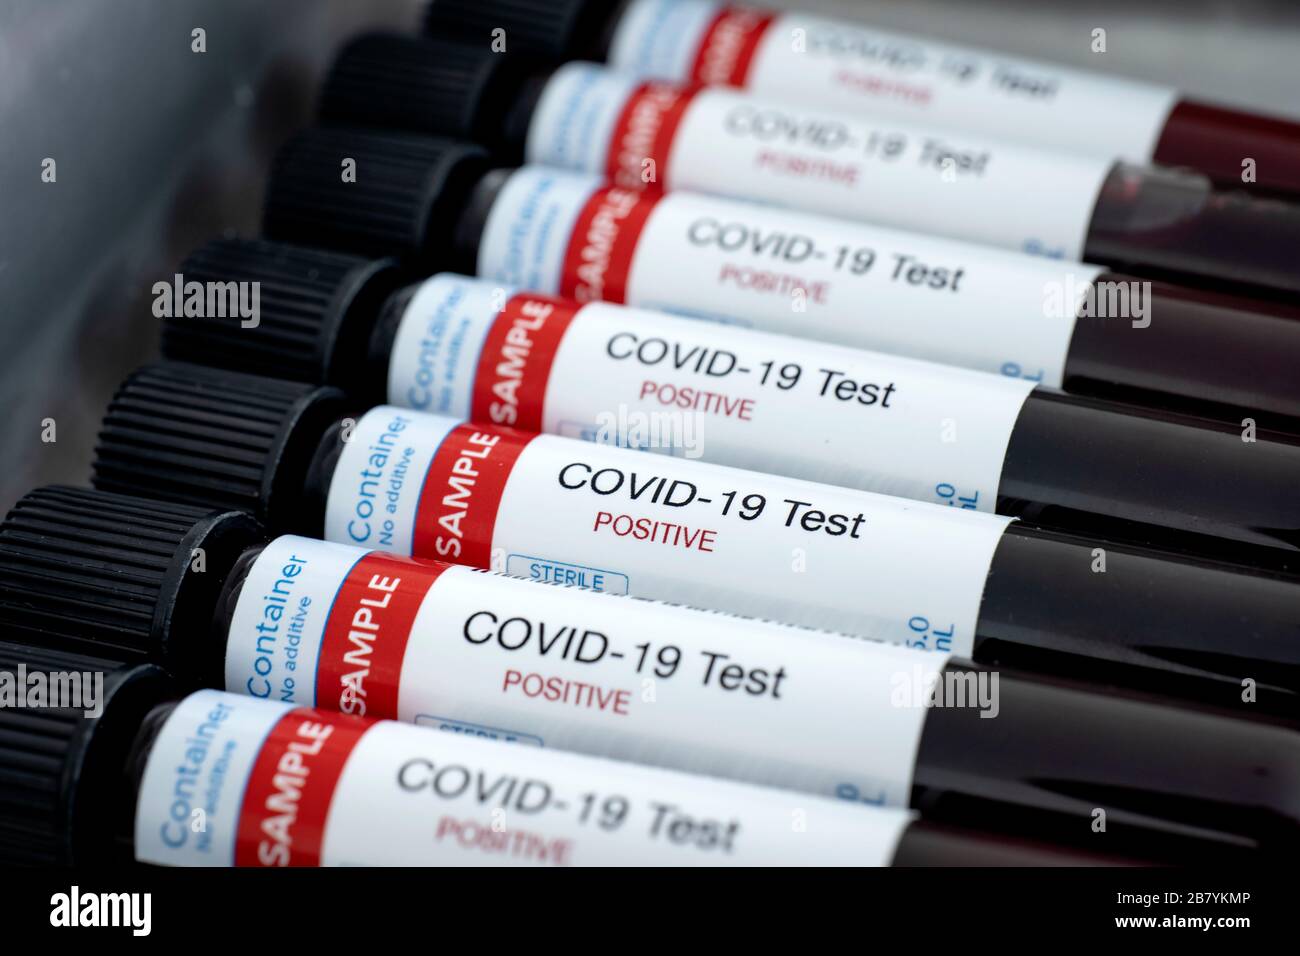 Testing for presence of coronavirus. Many tubes containing blood samples that have tested positive for COVID-19. Stock Photo